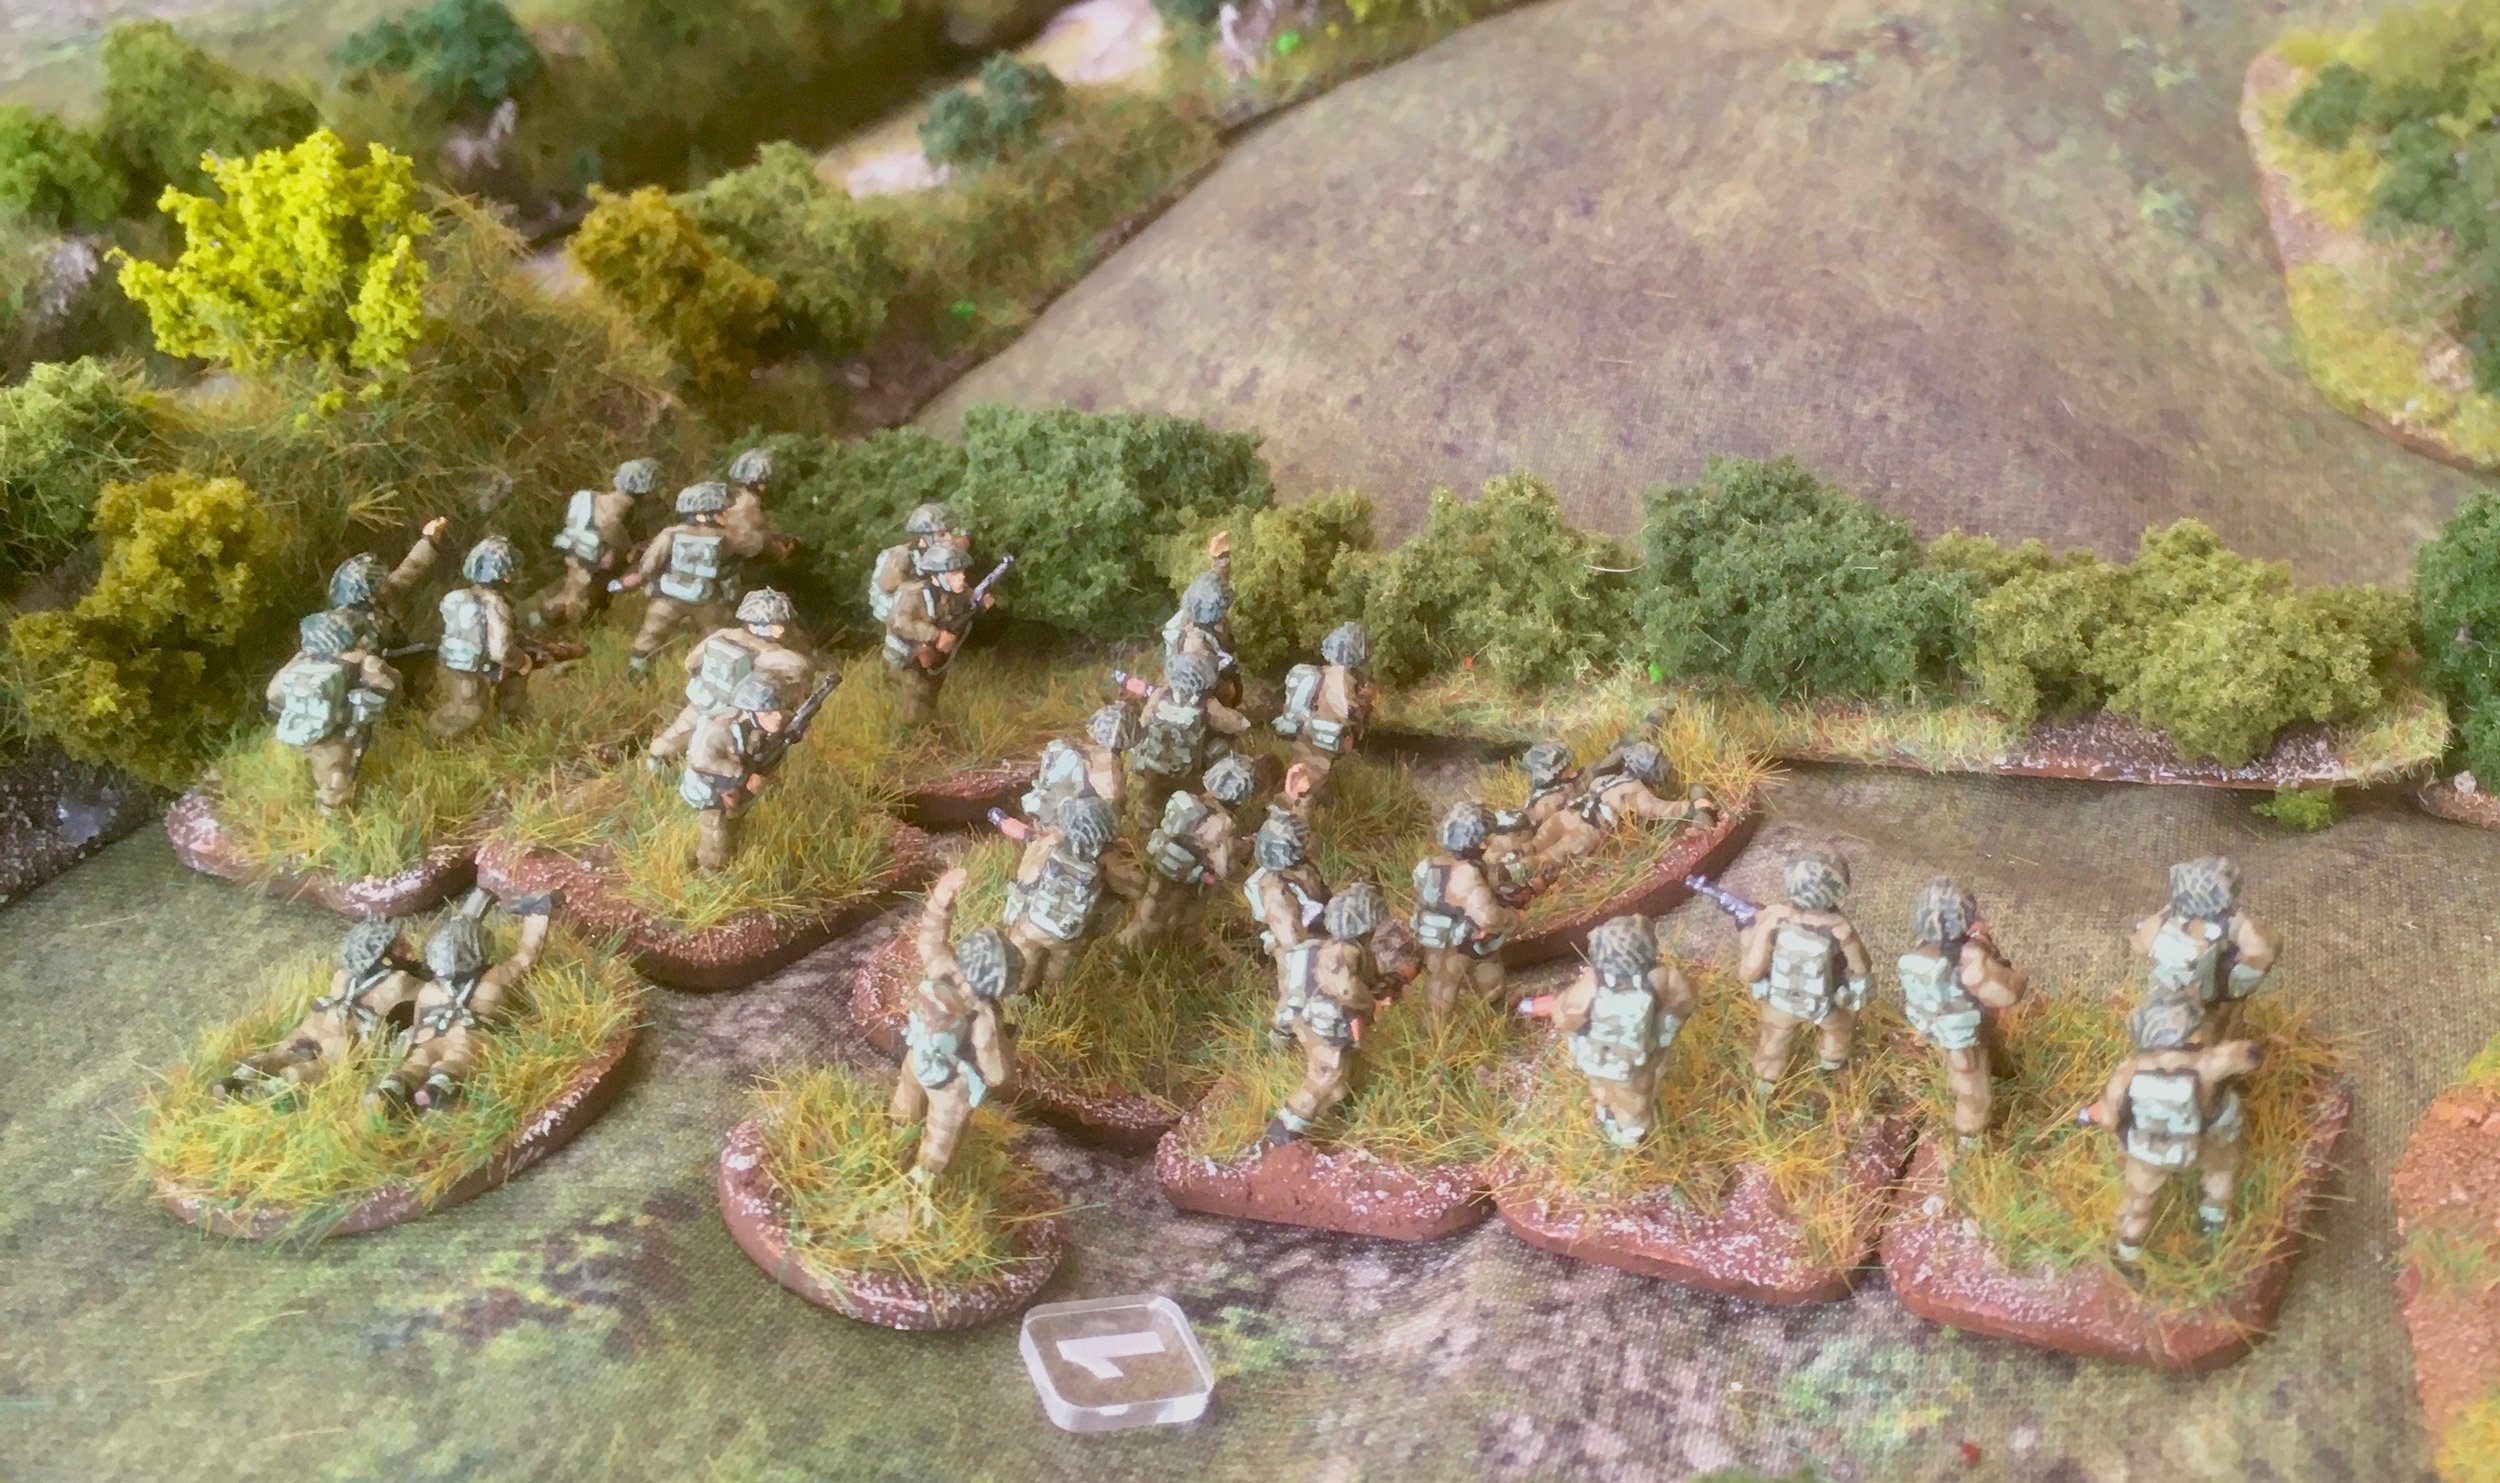 With the infantry of Das Reich making slow but determined progress towards the village, Andy deployed a platoon of the Tyneside Scottish facing the German left flank...